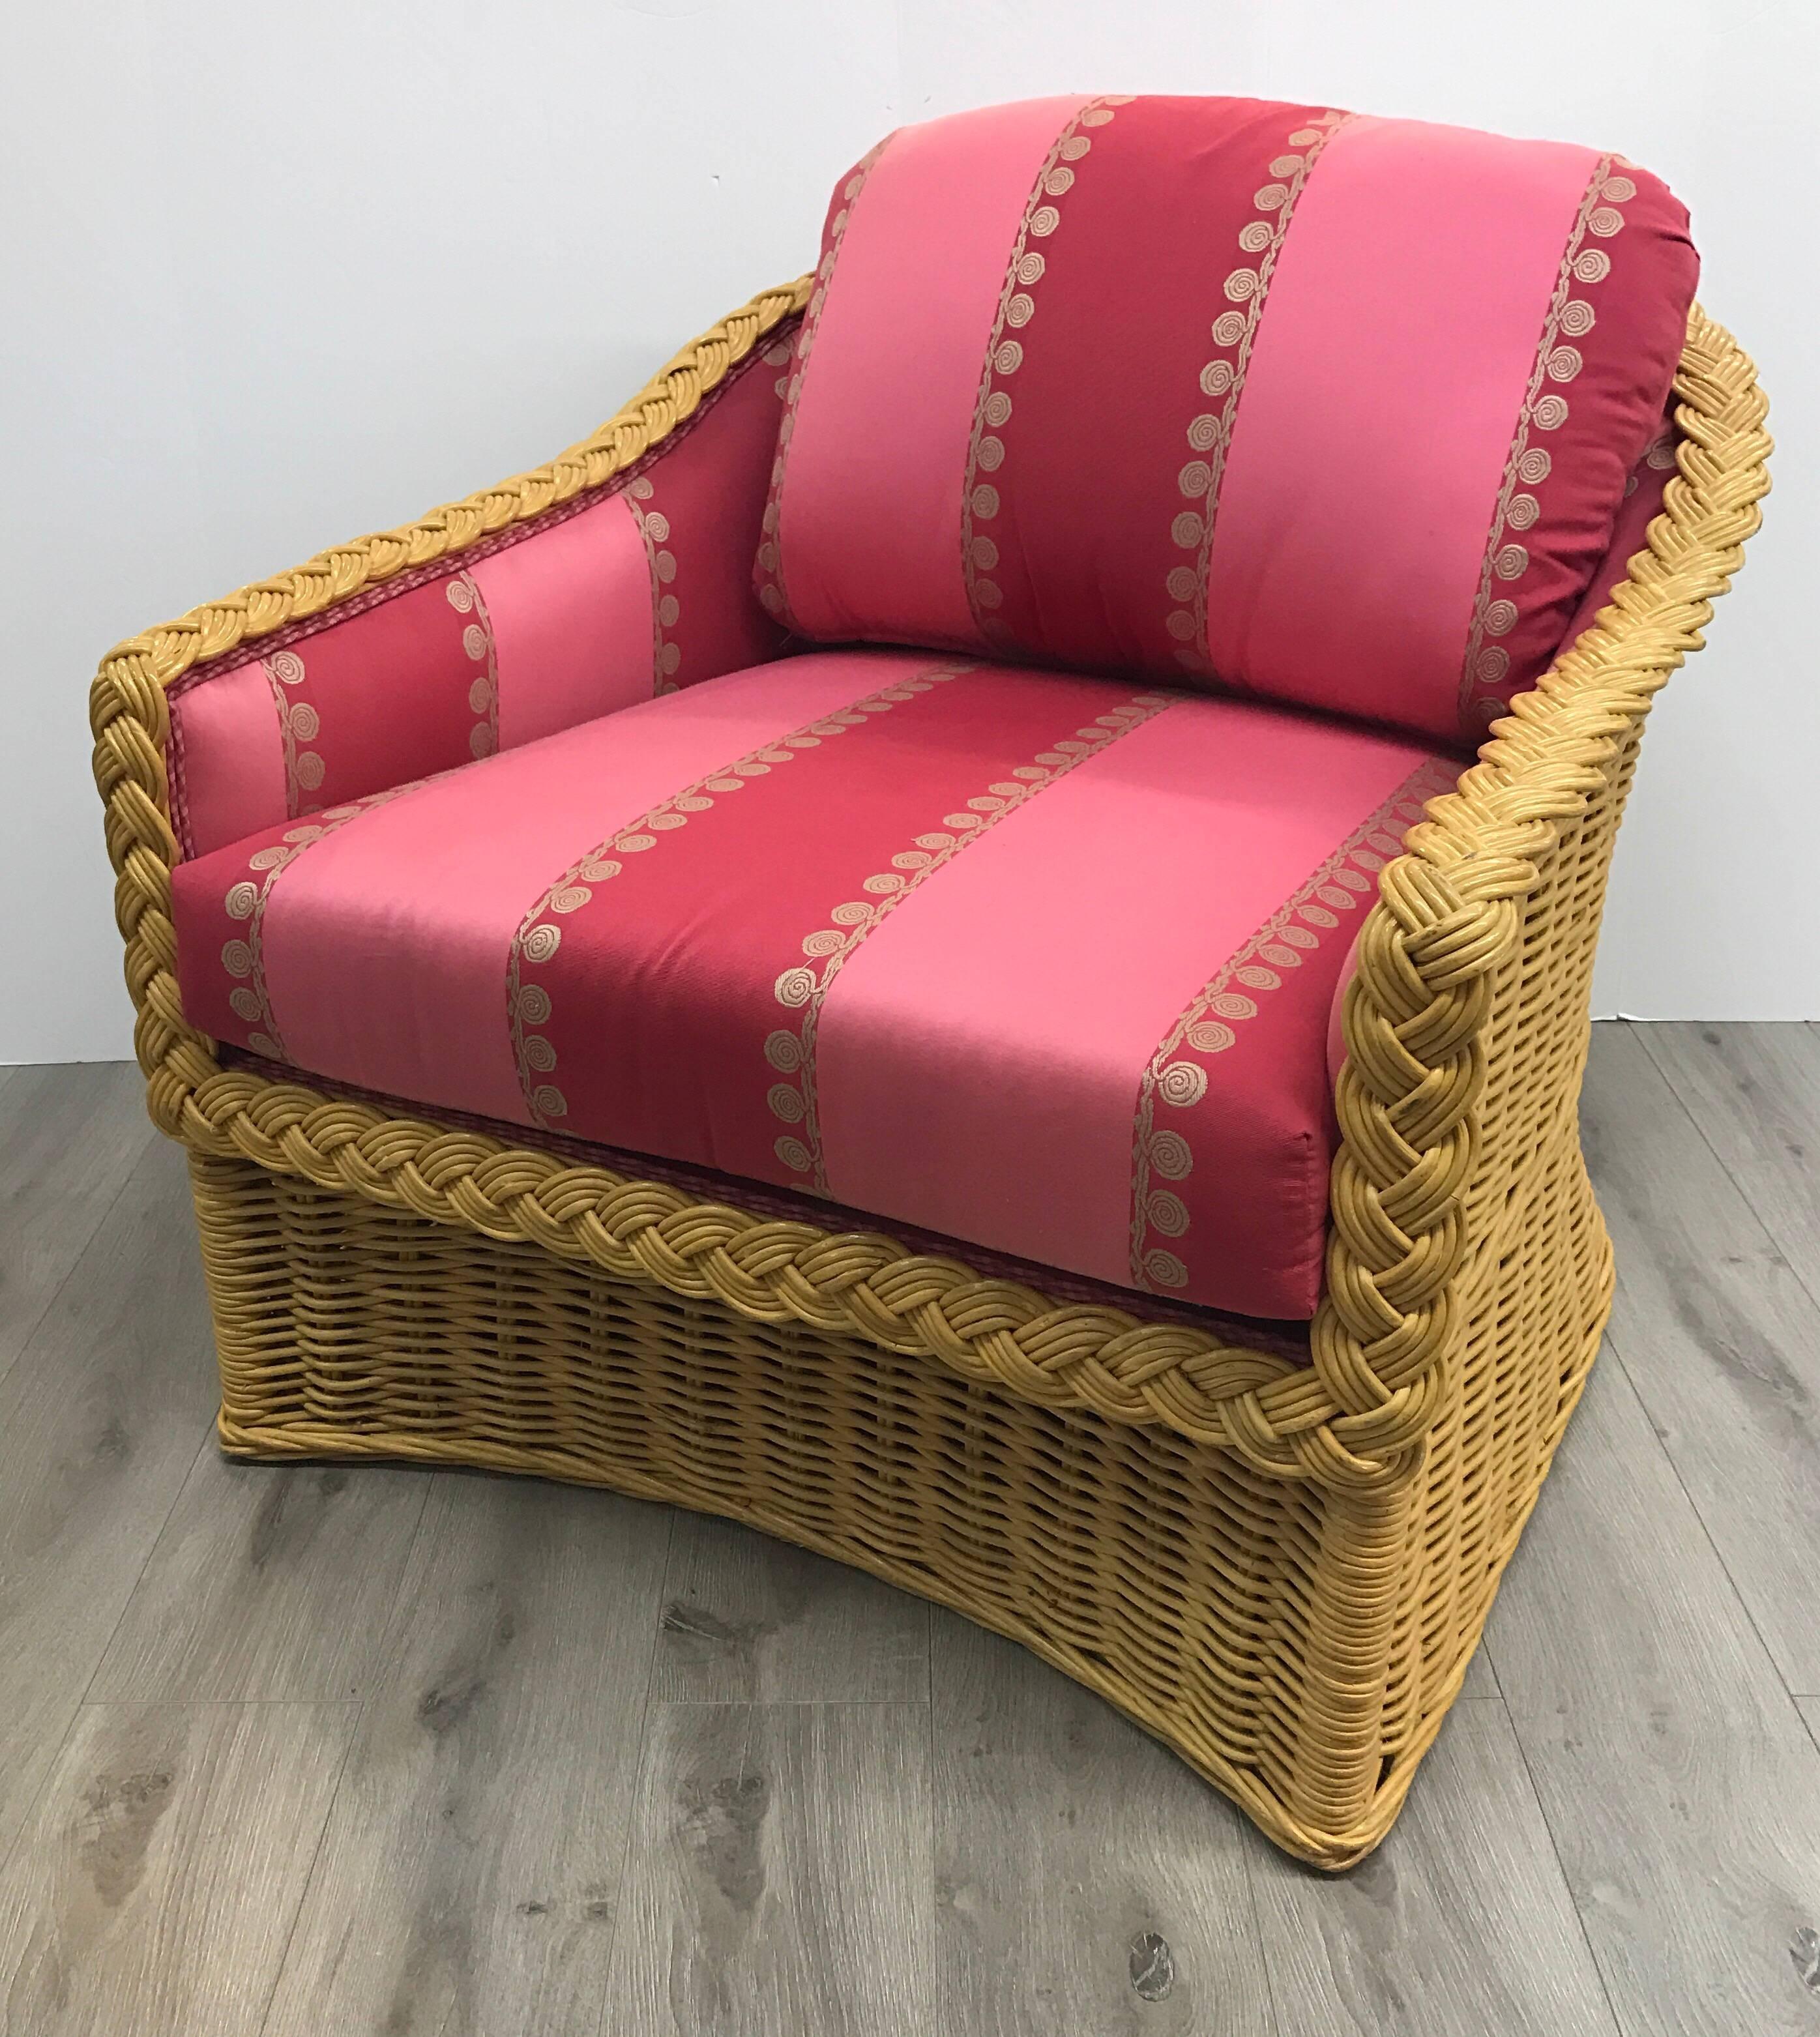 The colors are killer on this wicker lounge chair with matching ottoman. Chairs is upholstered inside and also has a loose seat and back cushion. Ottoman has a loose cushion.
Ottomans measure 27 x 30 x 19 inches tall.
